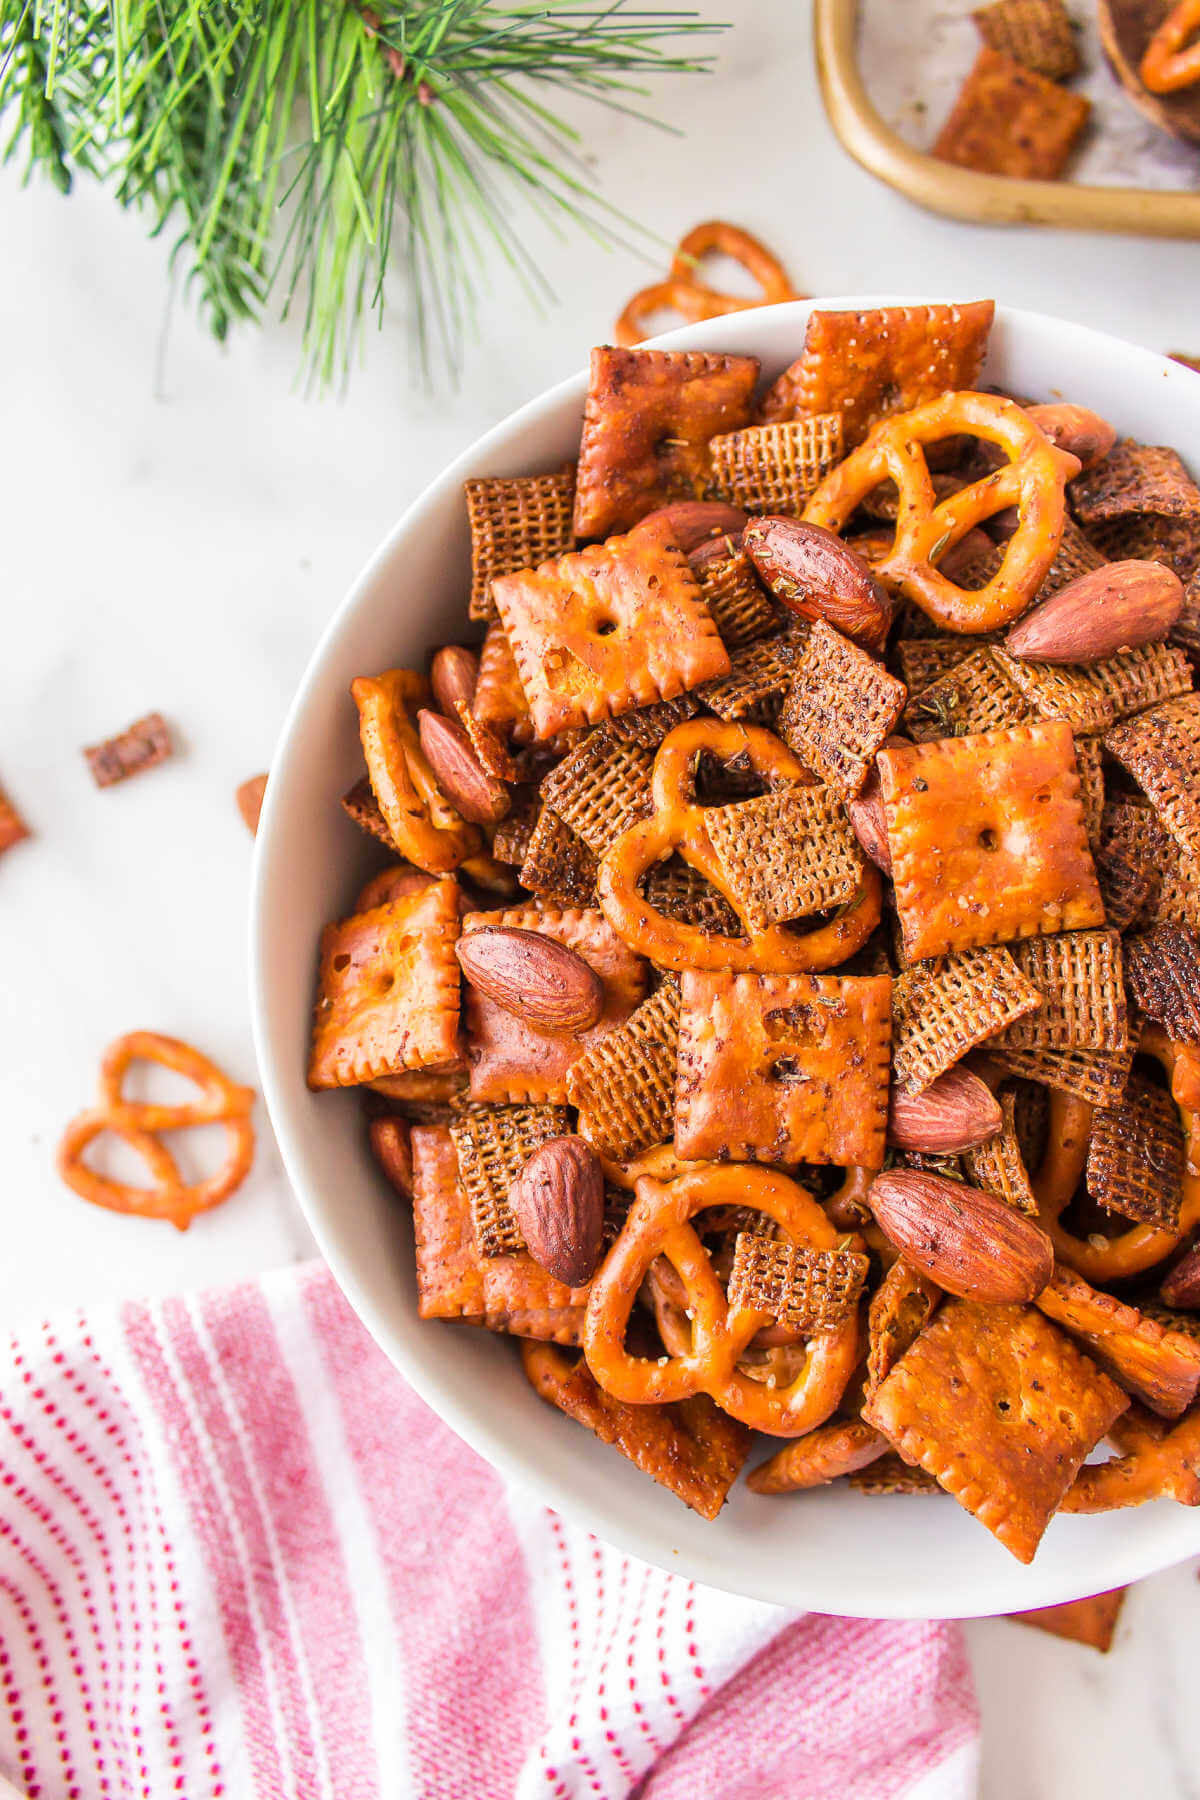 Chex Mix in a bowl on a table.